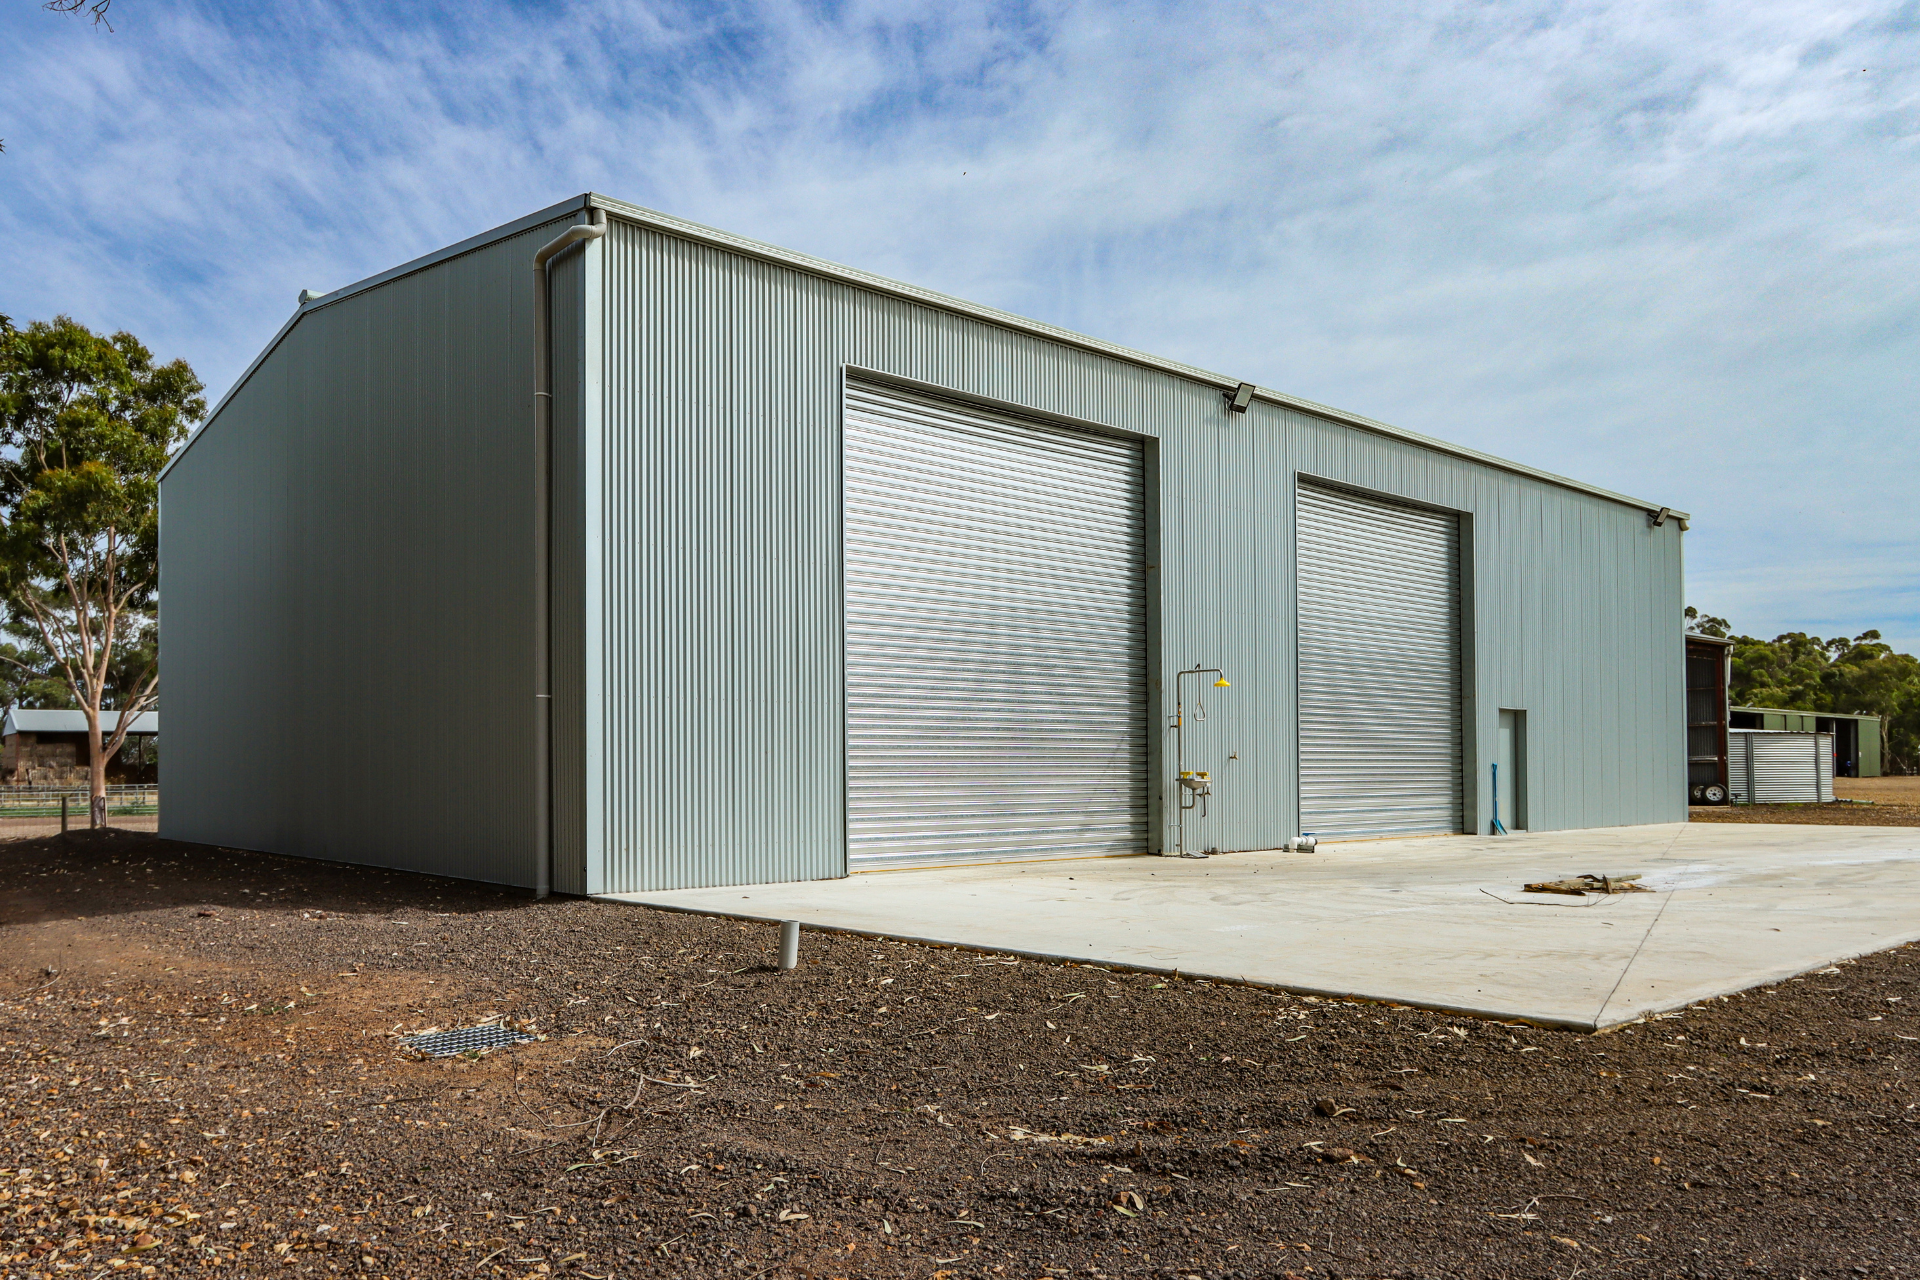 A 24m x 15m x 6m chemical shed at Streatham VIC